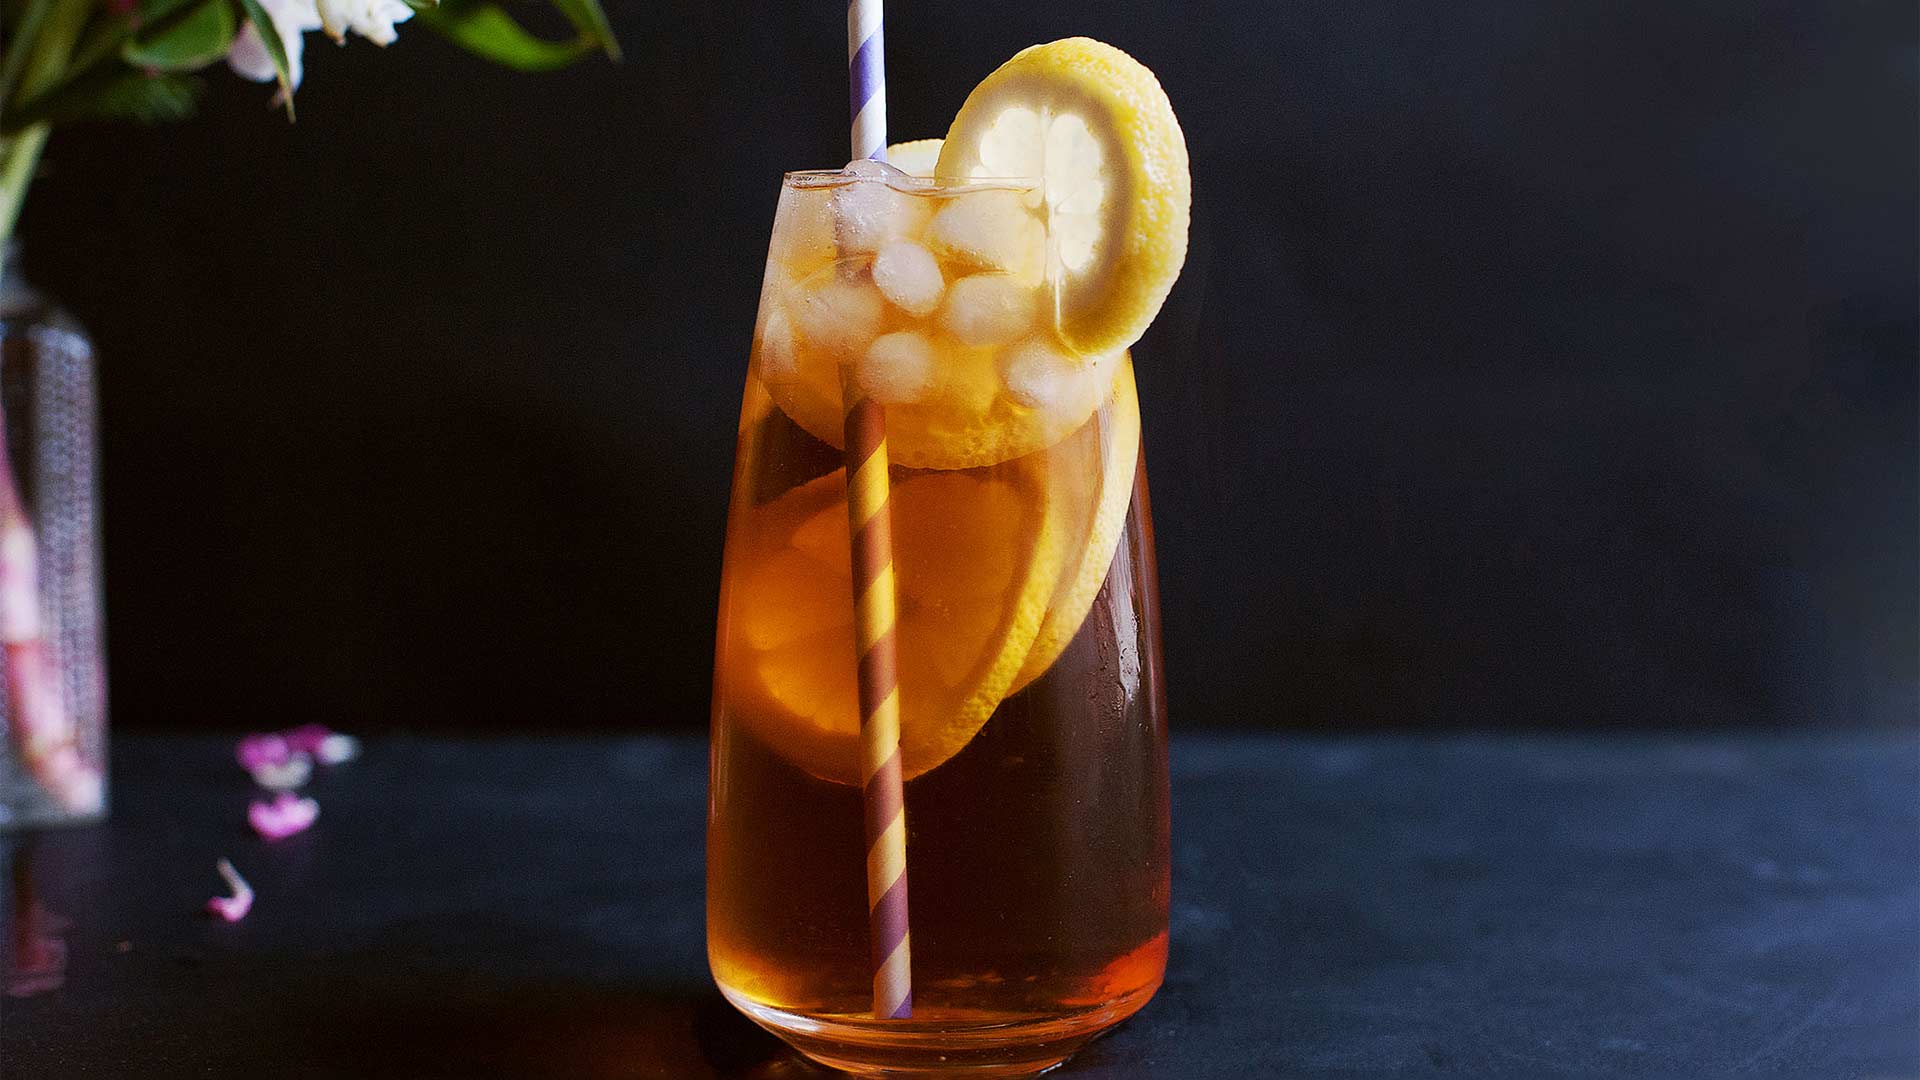 The Best of Mr. Coffee Iced Tea Makers